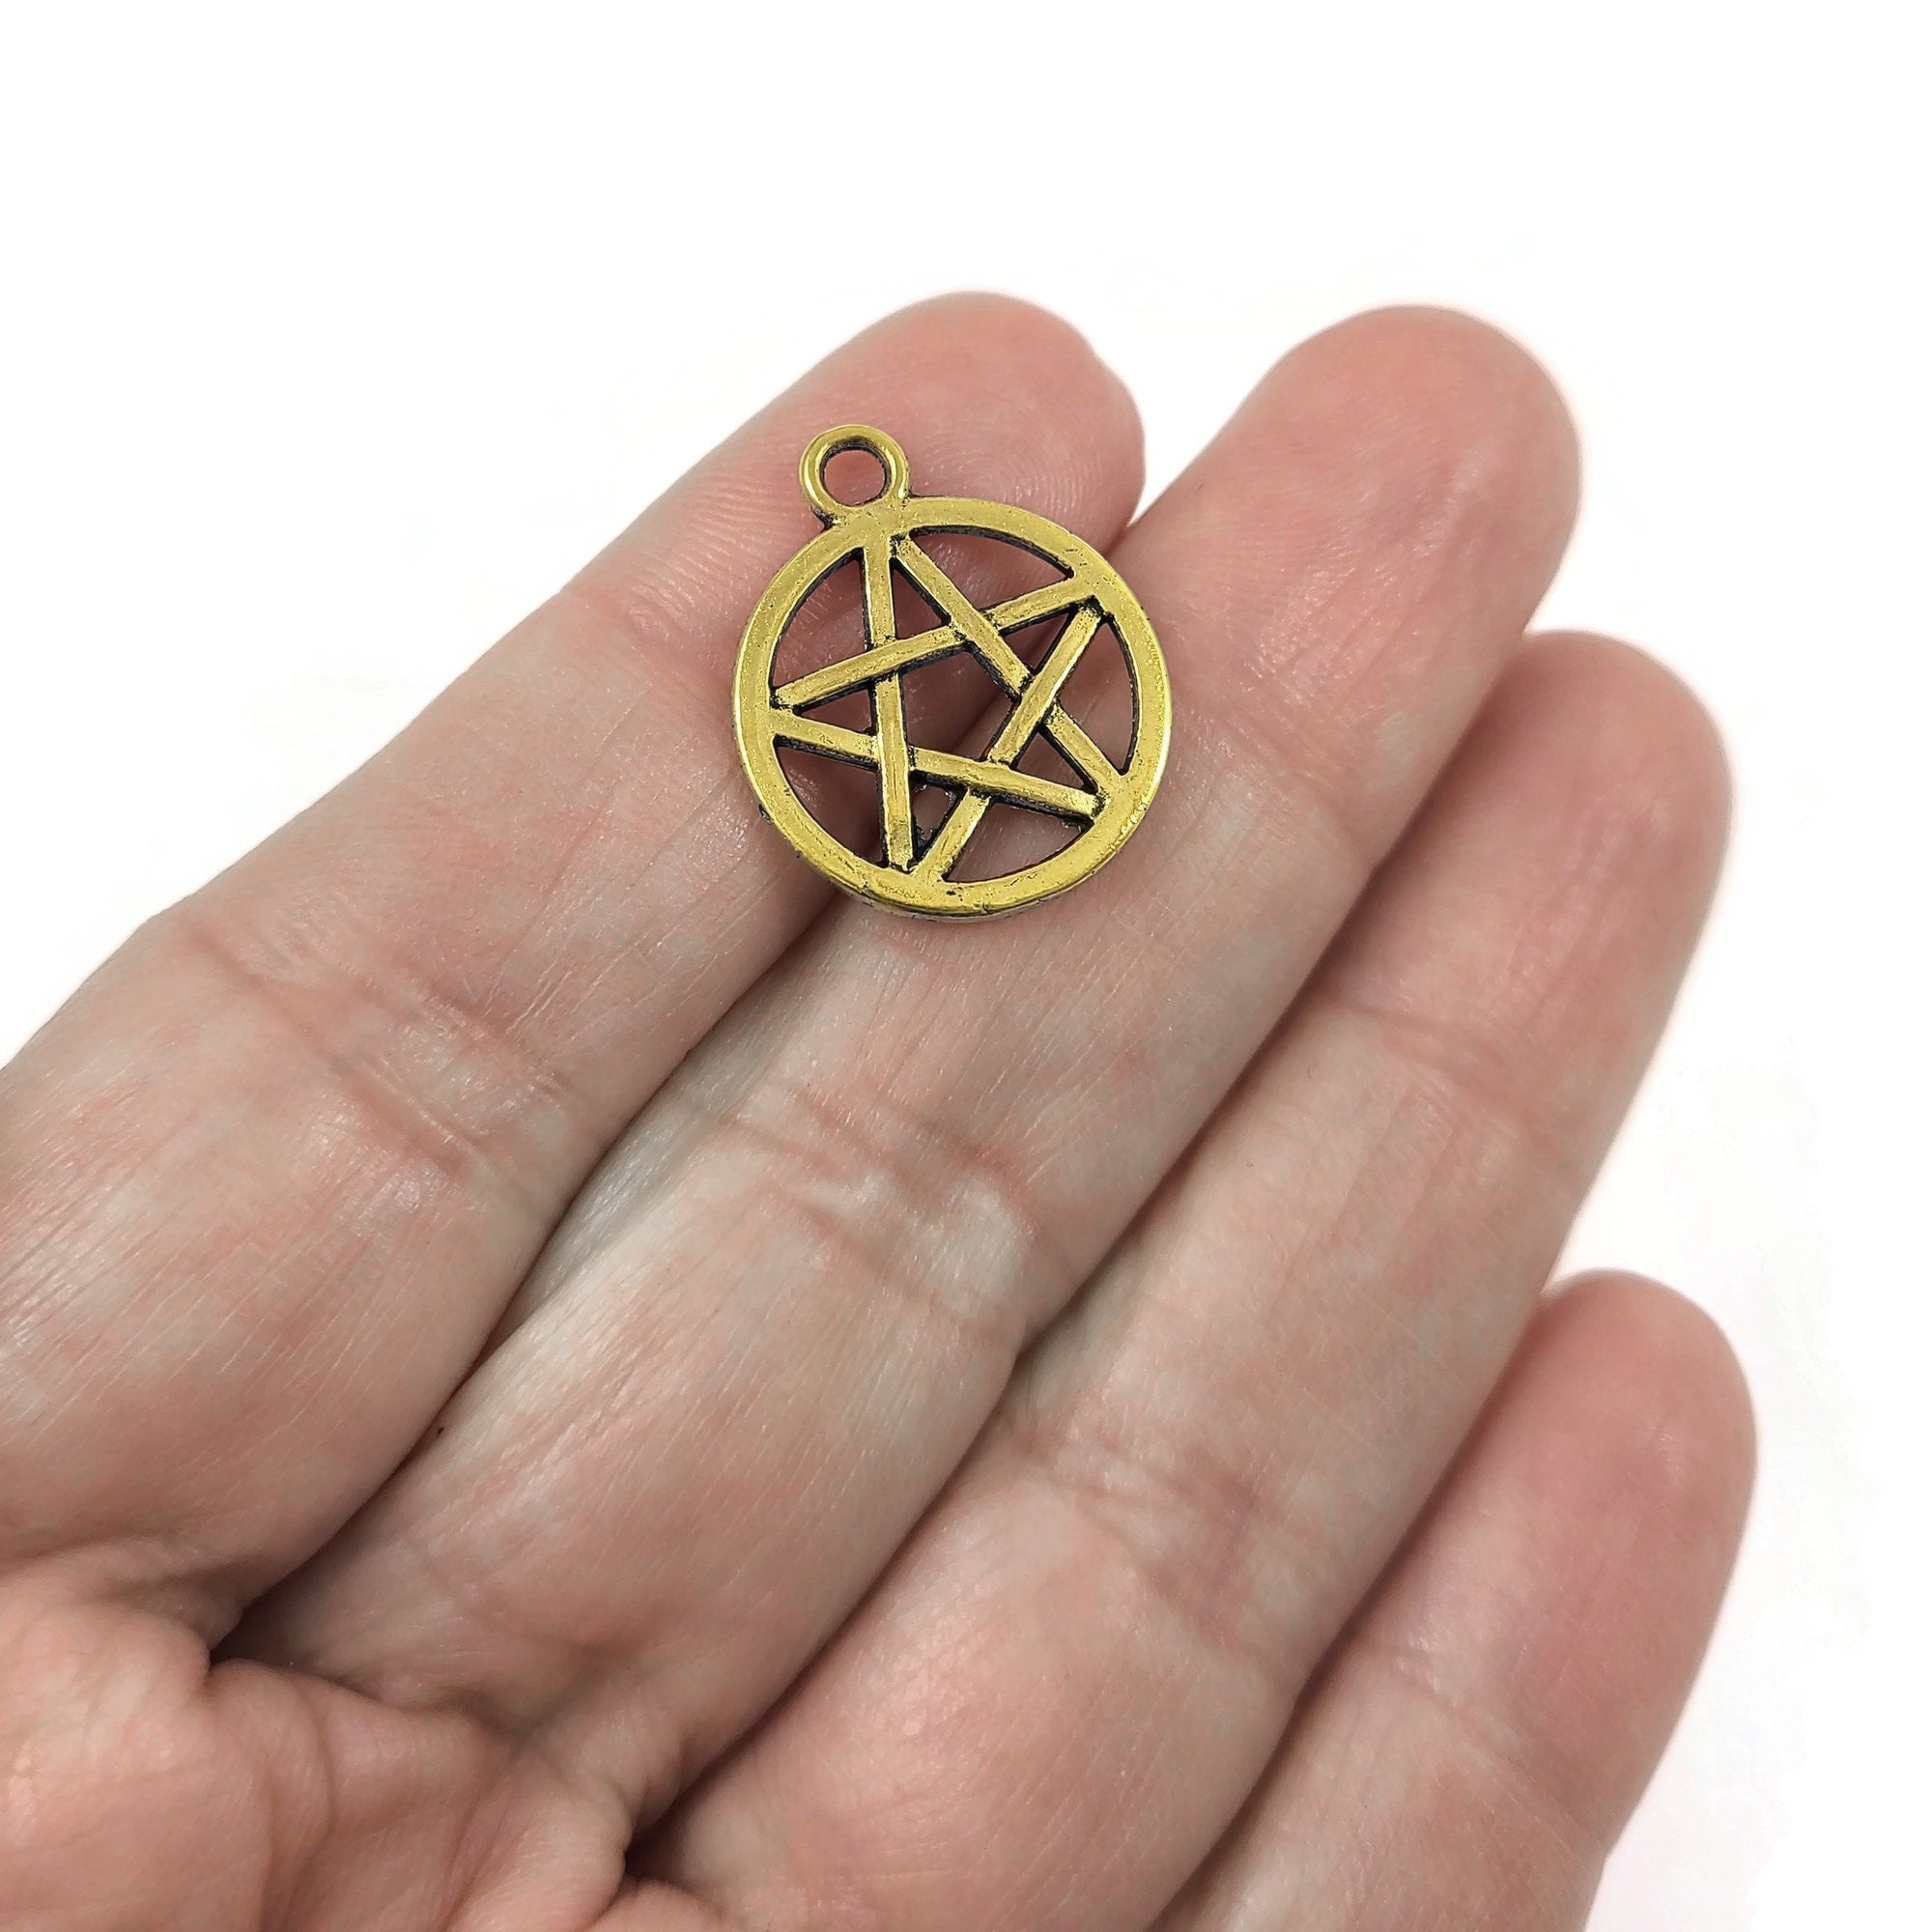 Hypoallergenic pentagram charms, 20mm nickel free pagan pendants, Pentacle star for jewelry making, Gold, Silver, Bronze